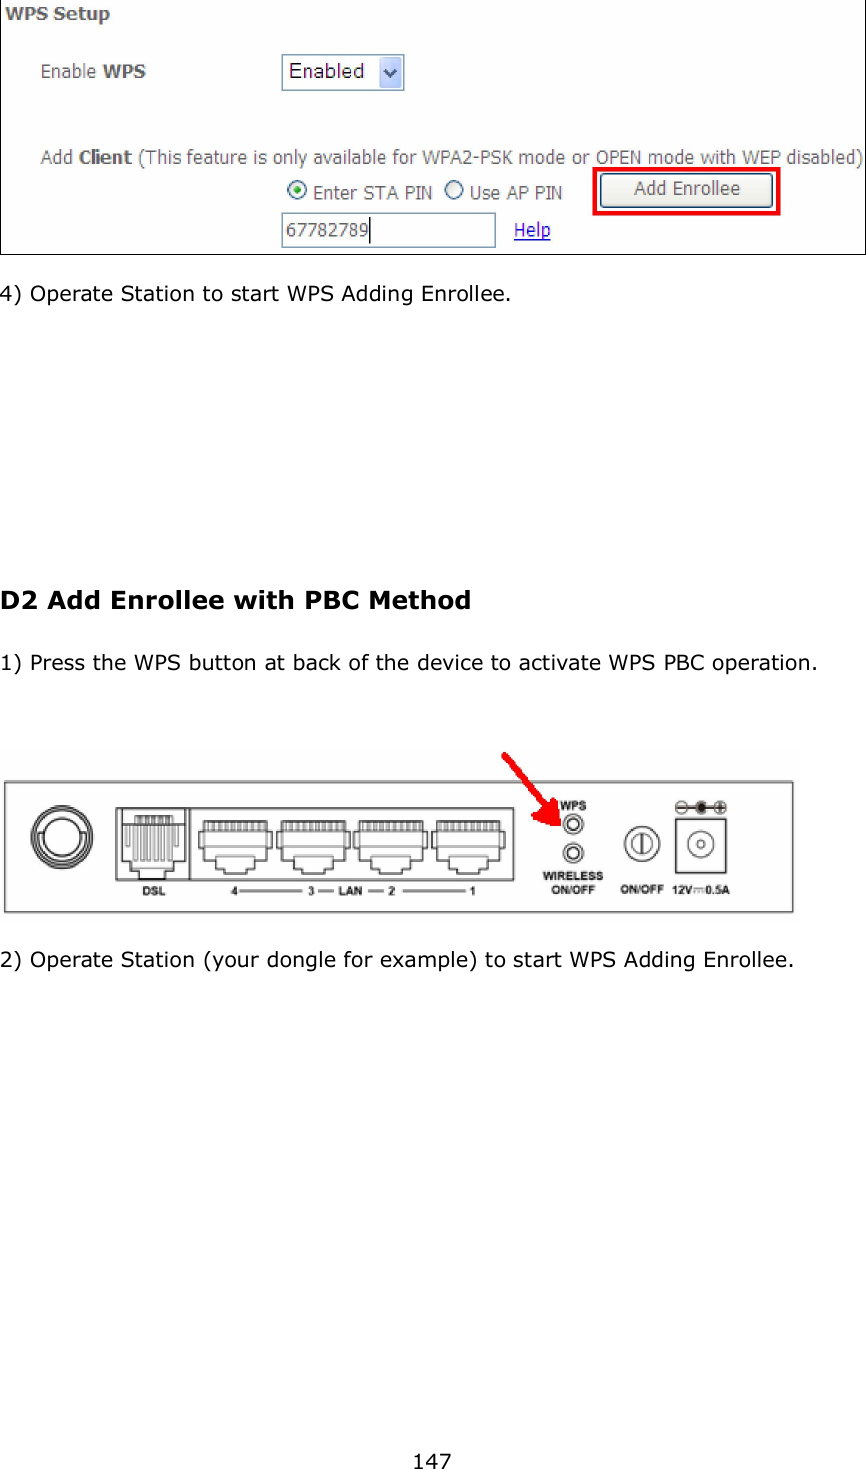  147    4) Operate Station to start WPS Adding Enrollee.              D2 Add Enrollee with PBC Method  1) Press the WPS button at back of the device to activate WPS PBC operation.      2) Operate Station (your dongle for example) to start WPS Adding Enrollee.               